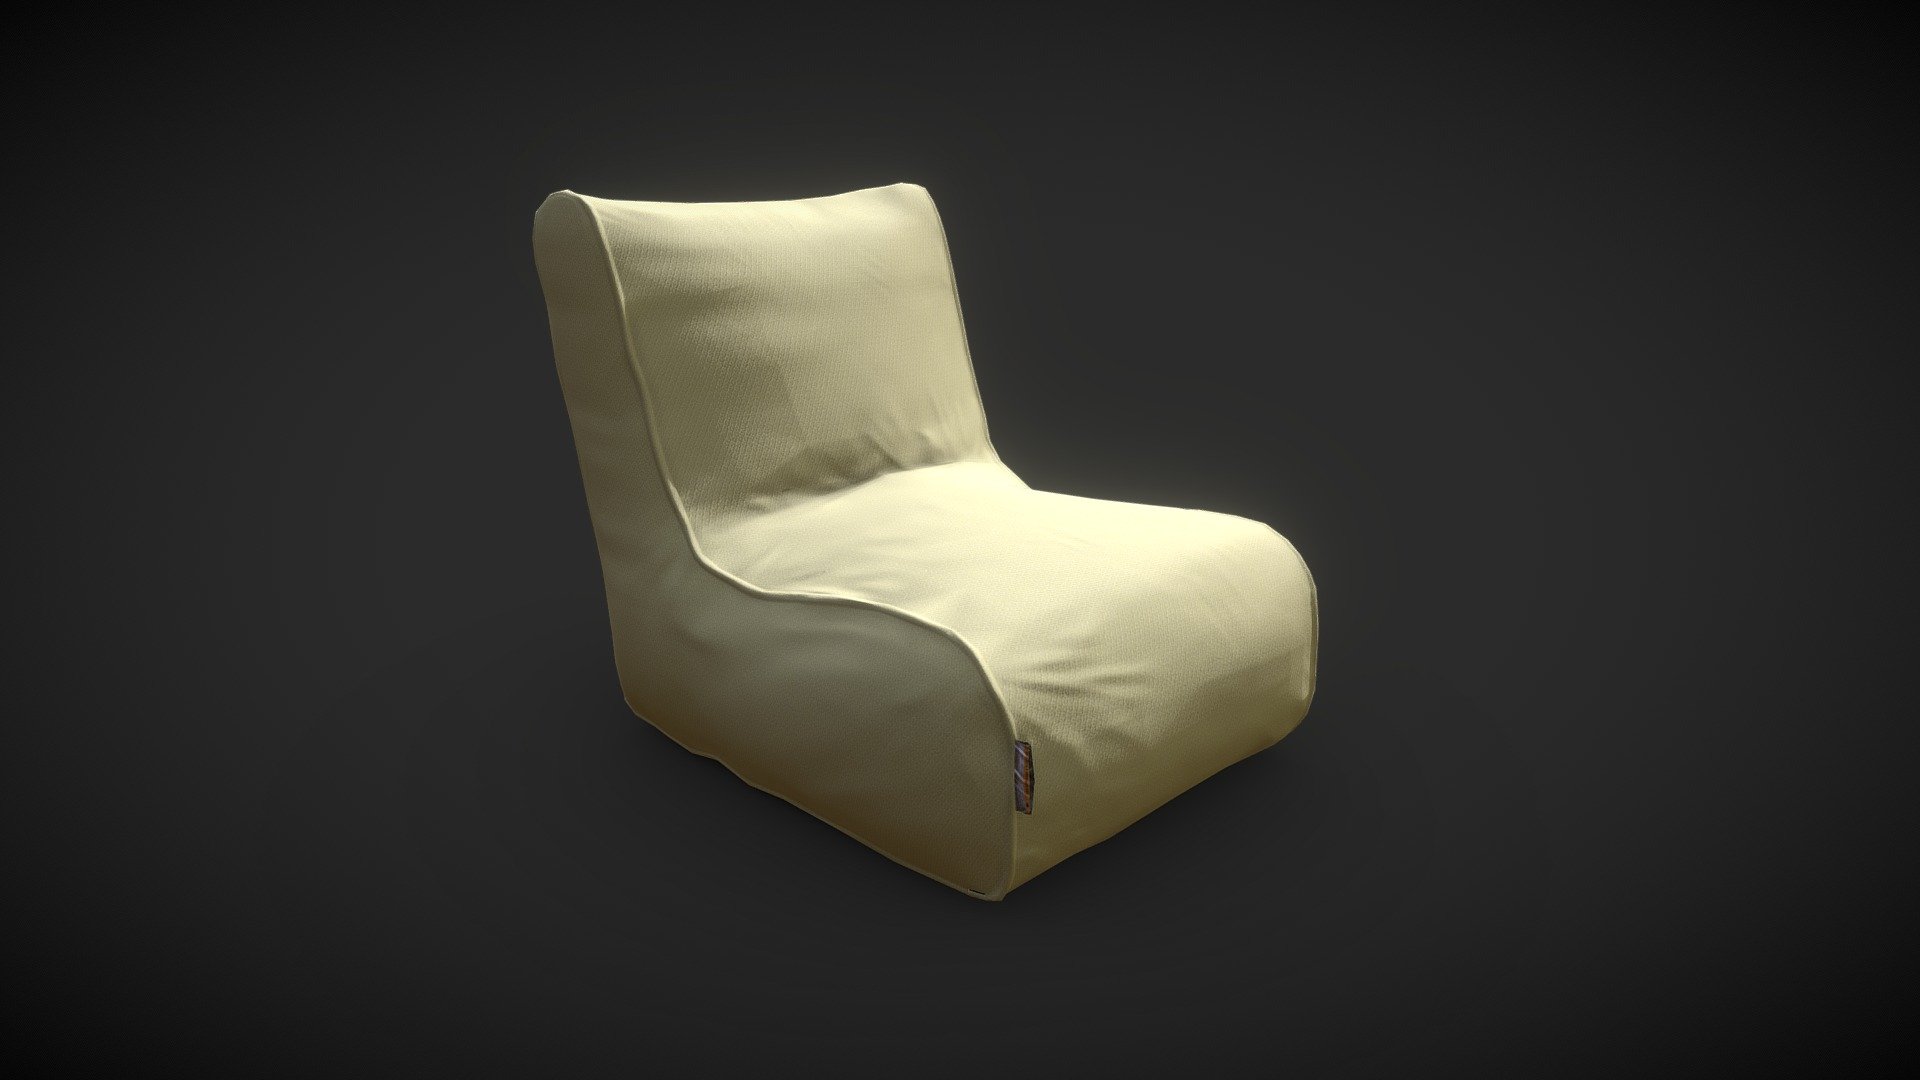 Bean Bag. Inside out brings to you highly detailed, optimized, with PBR materials. Can be used for any project and platform. AR, VR, Anroid, IOS, PC, etc. All maps albedo, normal, roughness, aoc, metallic and height are perfectly created with love and care and optimized for all platforms. Ready to be used in unity or unreal or any other engine.

*All textures are included in the package.

Features: - PBR validated - Super optimized 3D models - HD textures to boost every single detail - VR ready - AR ready - 4k Textures - Soft Bean Bag - Buy Royalty Free 3D model by Inside Out Art (@ranajitdas) 3d model